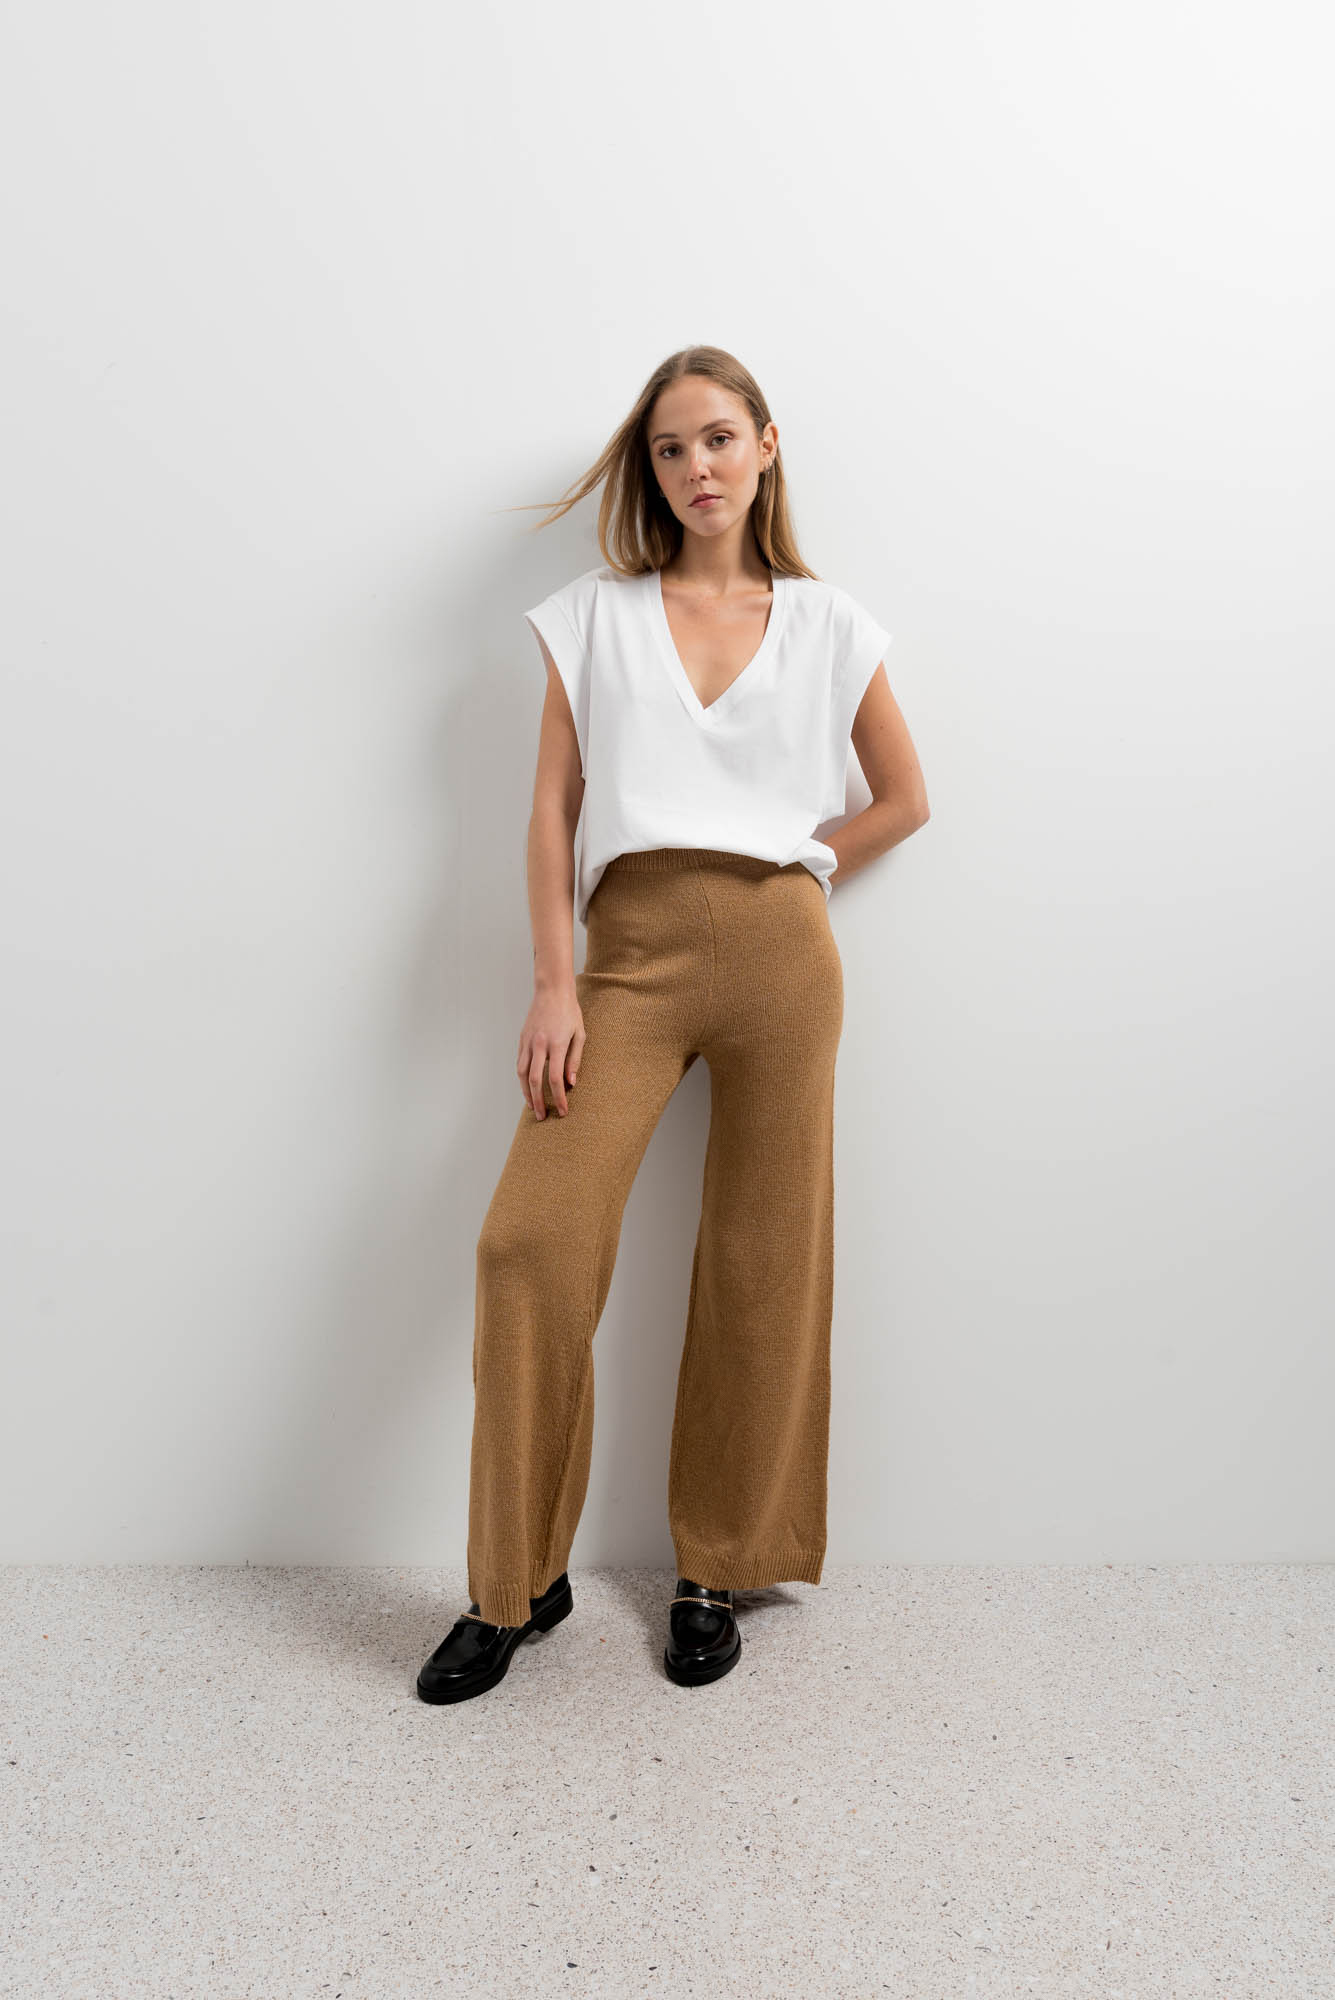 The French 95 - Swiss online shopping for women's fashion - Shop women's knitted trousers at affordable prices - Free shipping in Switzerland